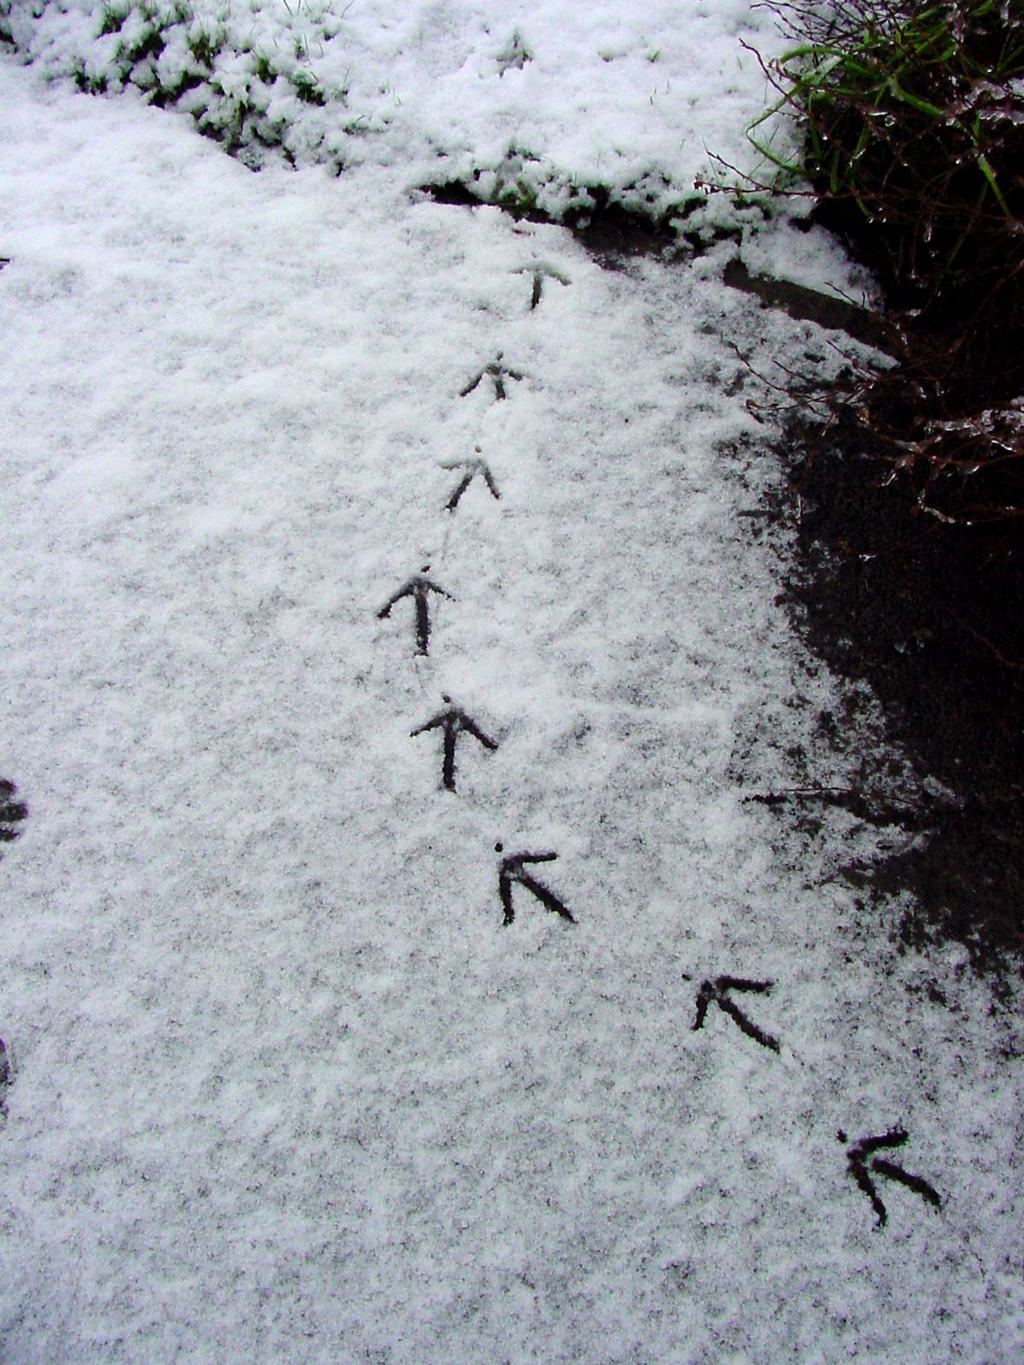 Pheasant footprints in snow (Select to close)